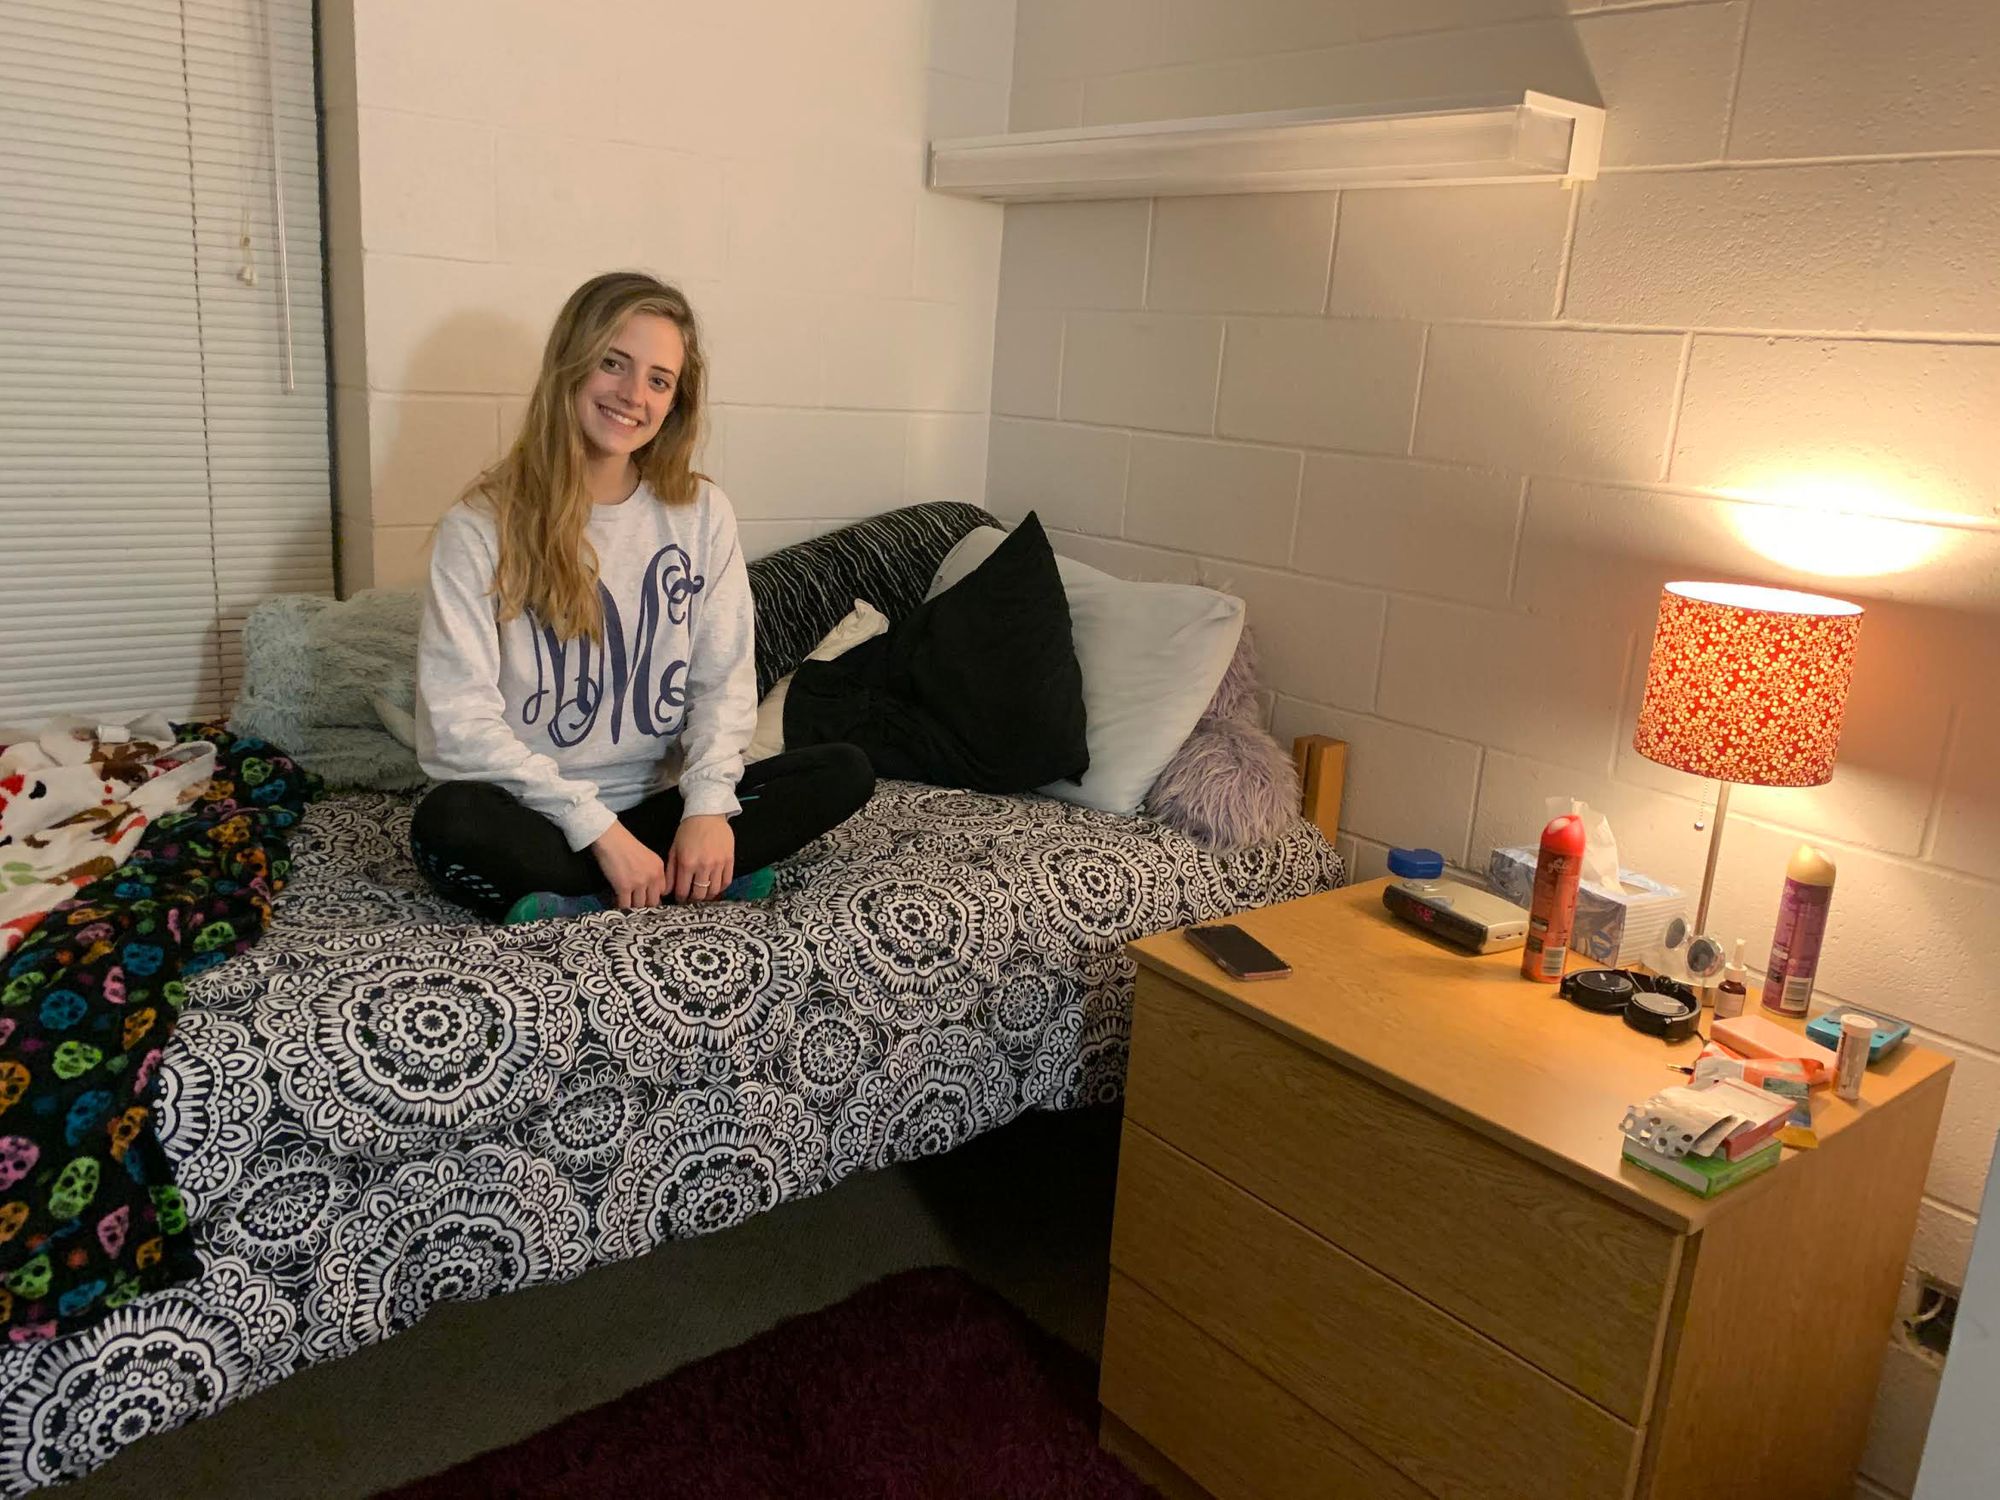 Commuters get a free six-week stay in res halls